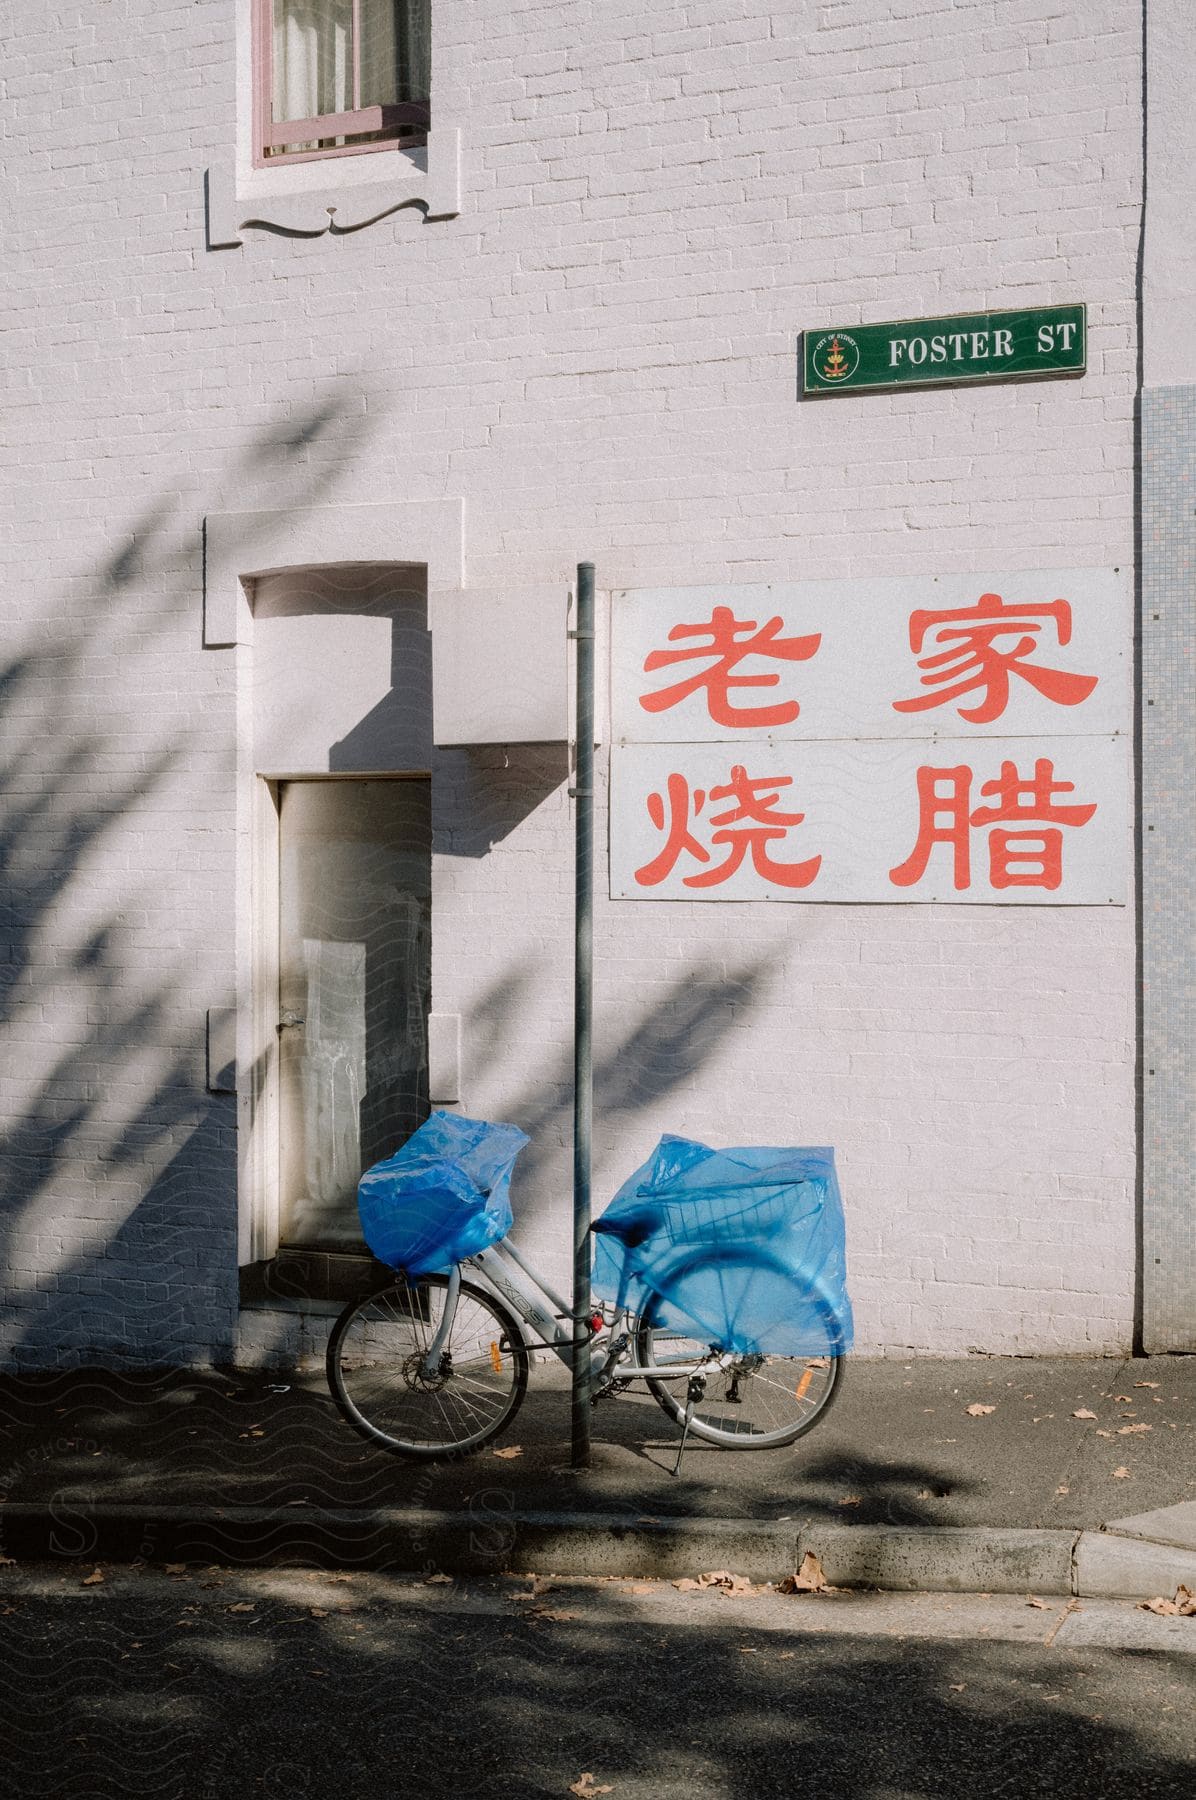 A bicycle is parked next to a building with a blue tire cover. A sign that says "Foster Street" is above the bicycle, with some Chinese characters written in red below it.